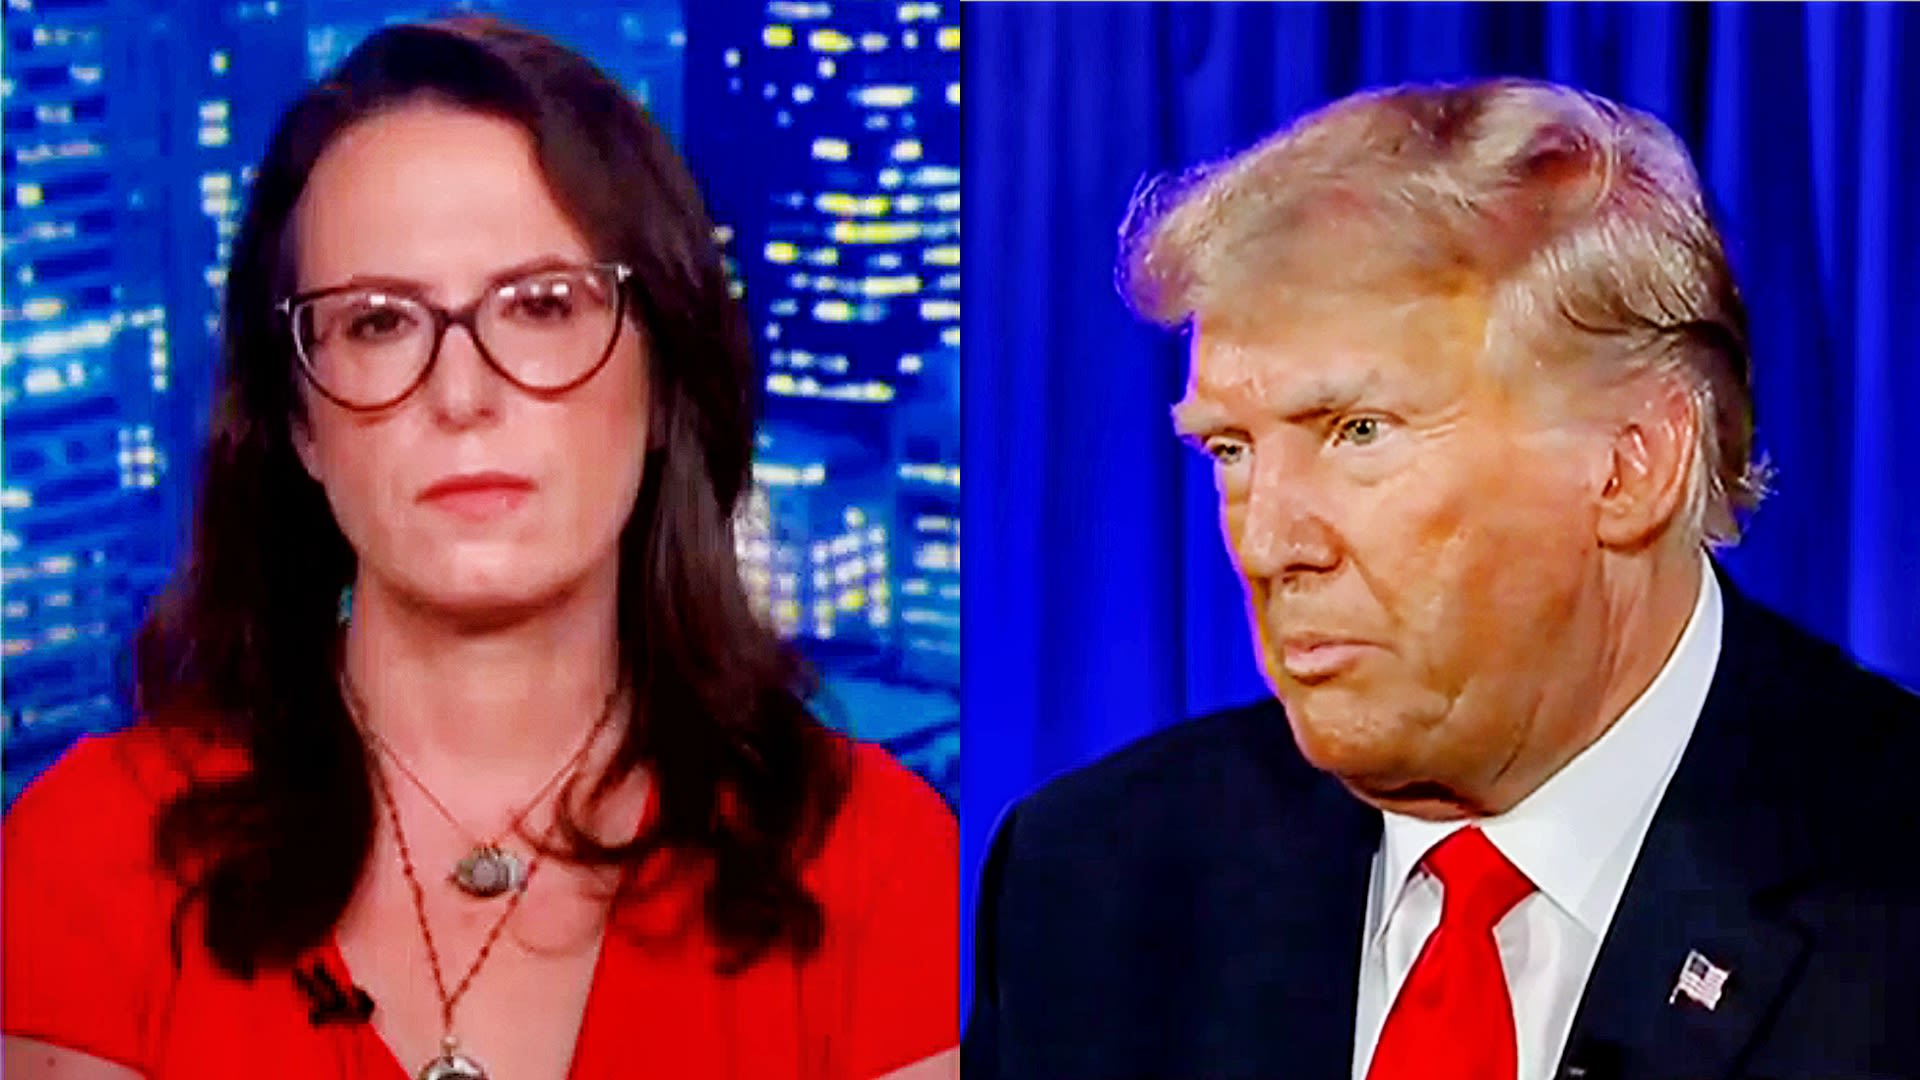 Maggie Haberman Says Trump Itching For Attention During Biden Debate Crisis Cycle: ‘Wants The Narrative Back On Him’